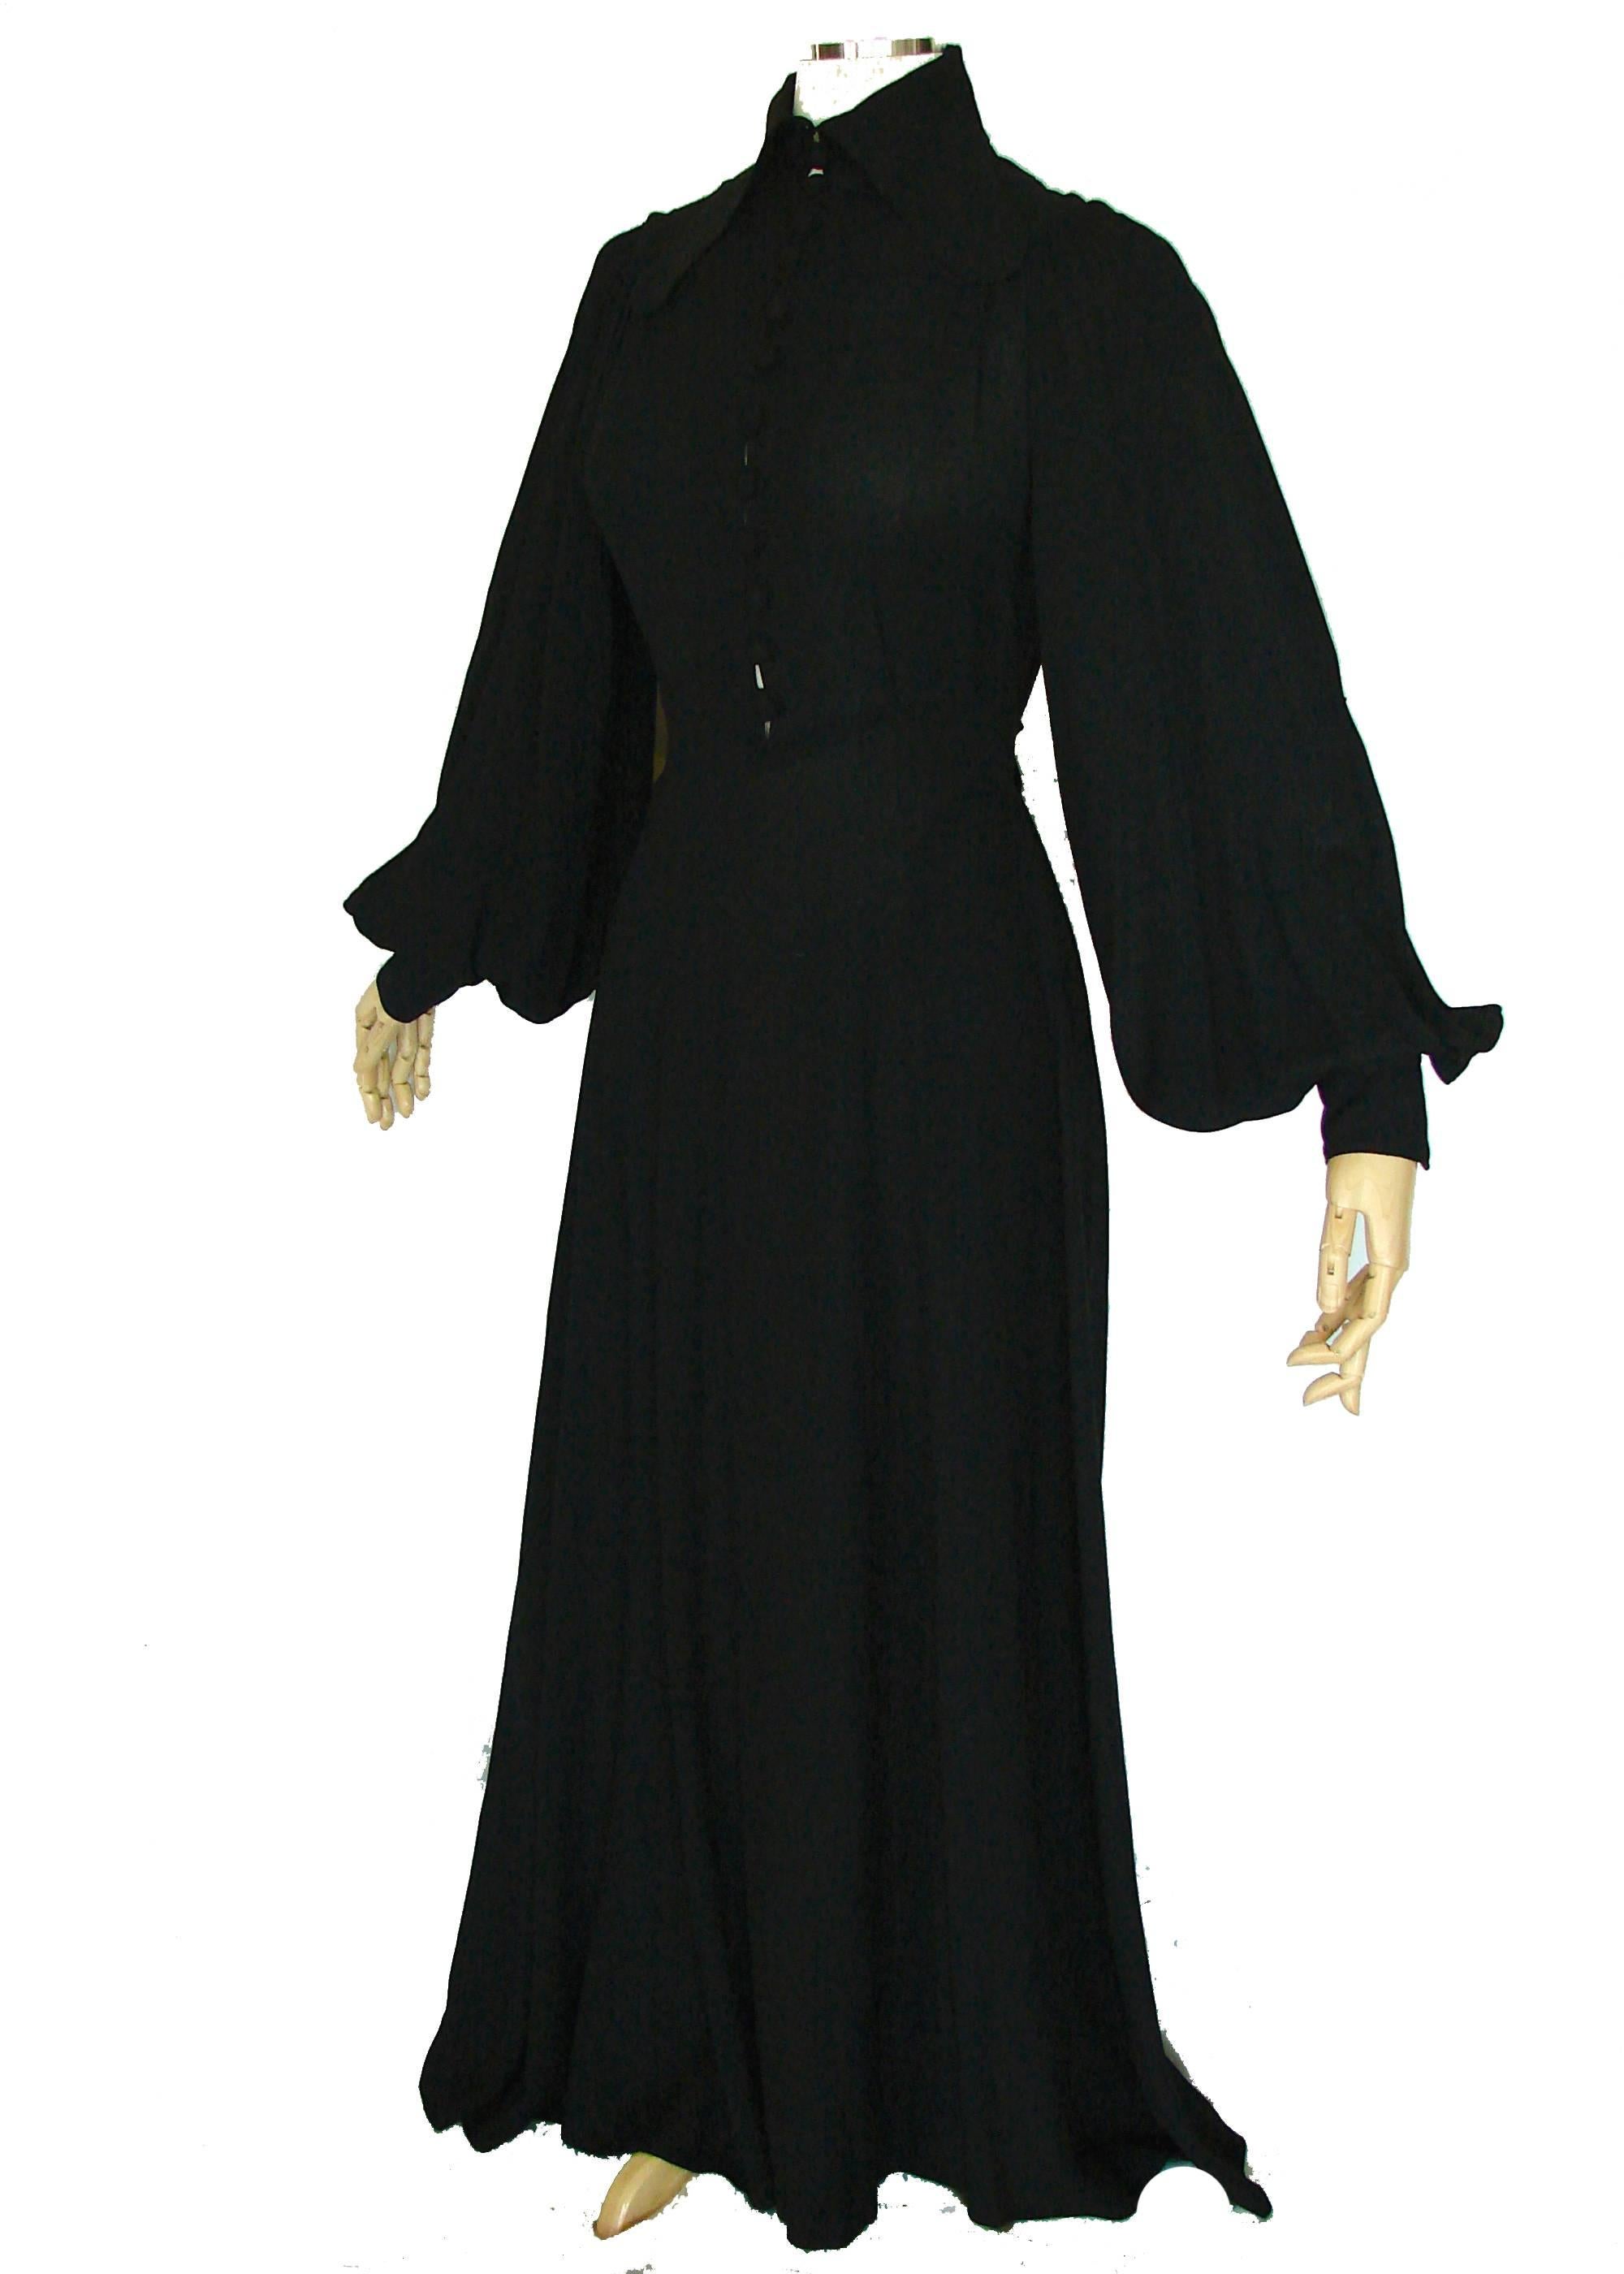 This fabulous maxi dress was designed by Ossie Clark for Radley in the 1970s.  Made from his signature moss crepe fabric in black, it features a wide lapel collar and a row of fabric covered buttons that can be adjusted to show as much or as little